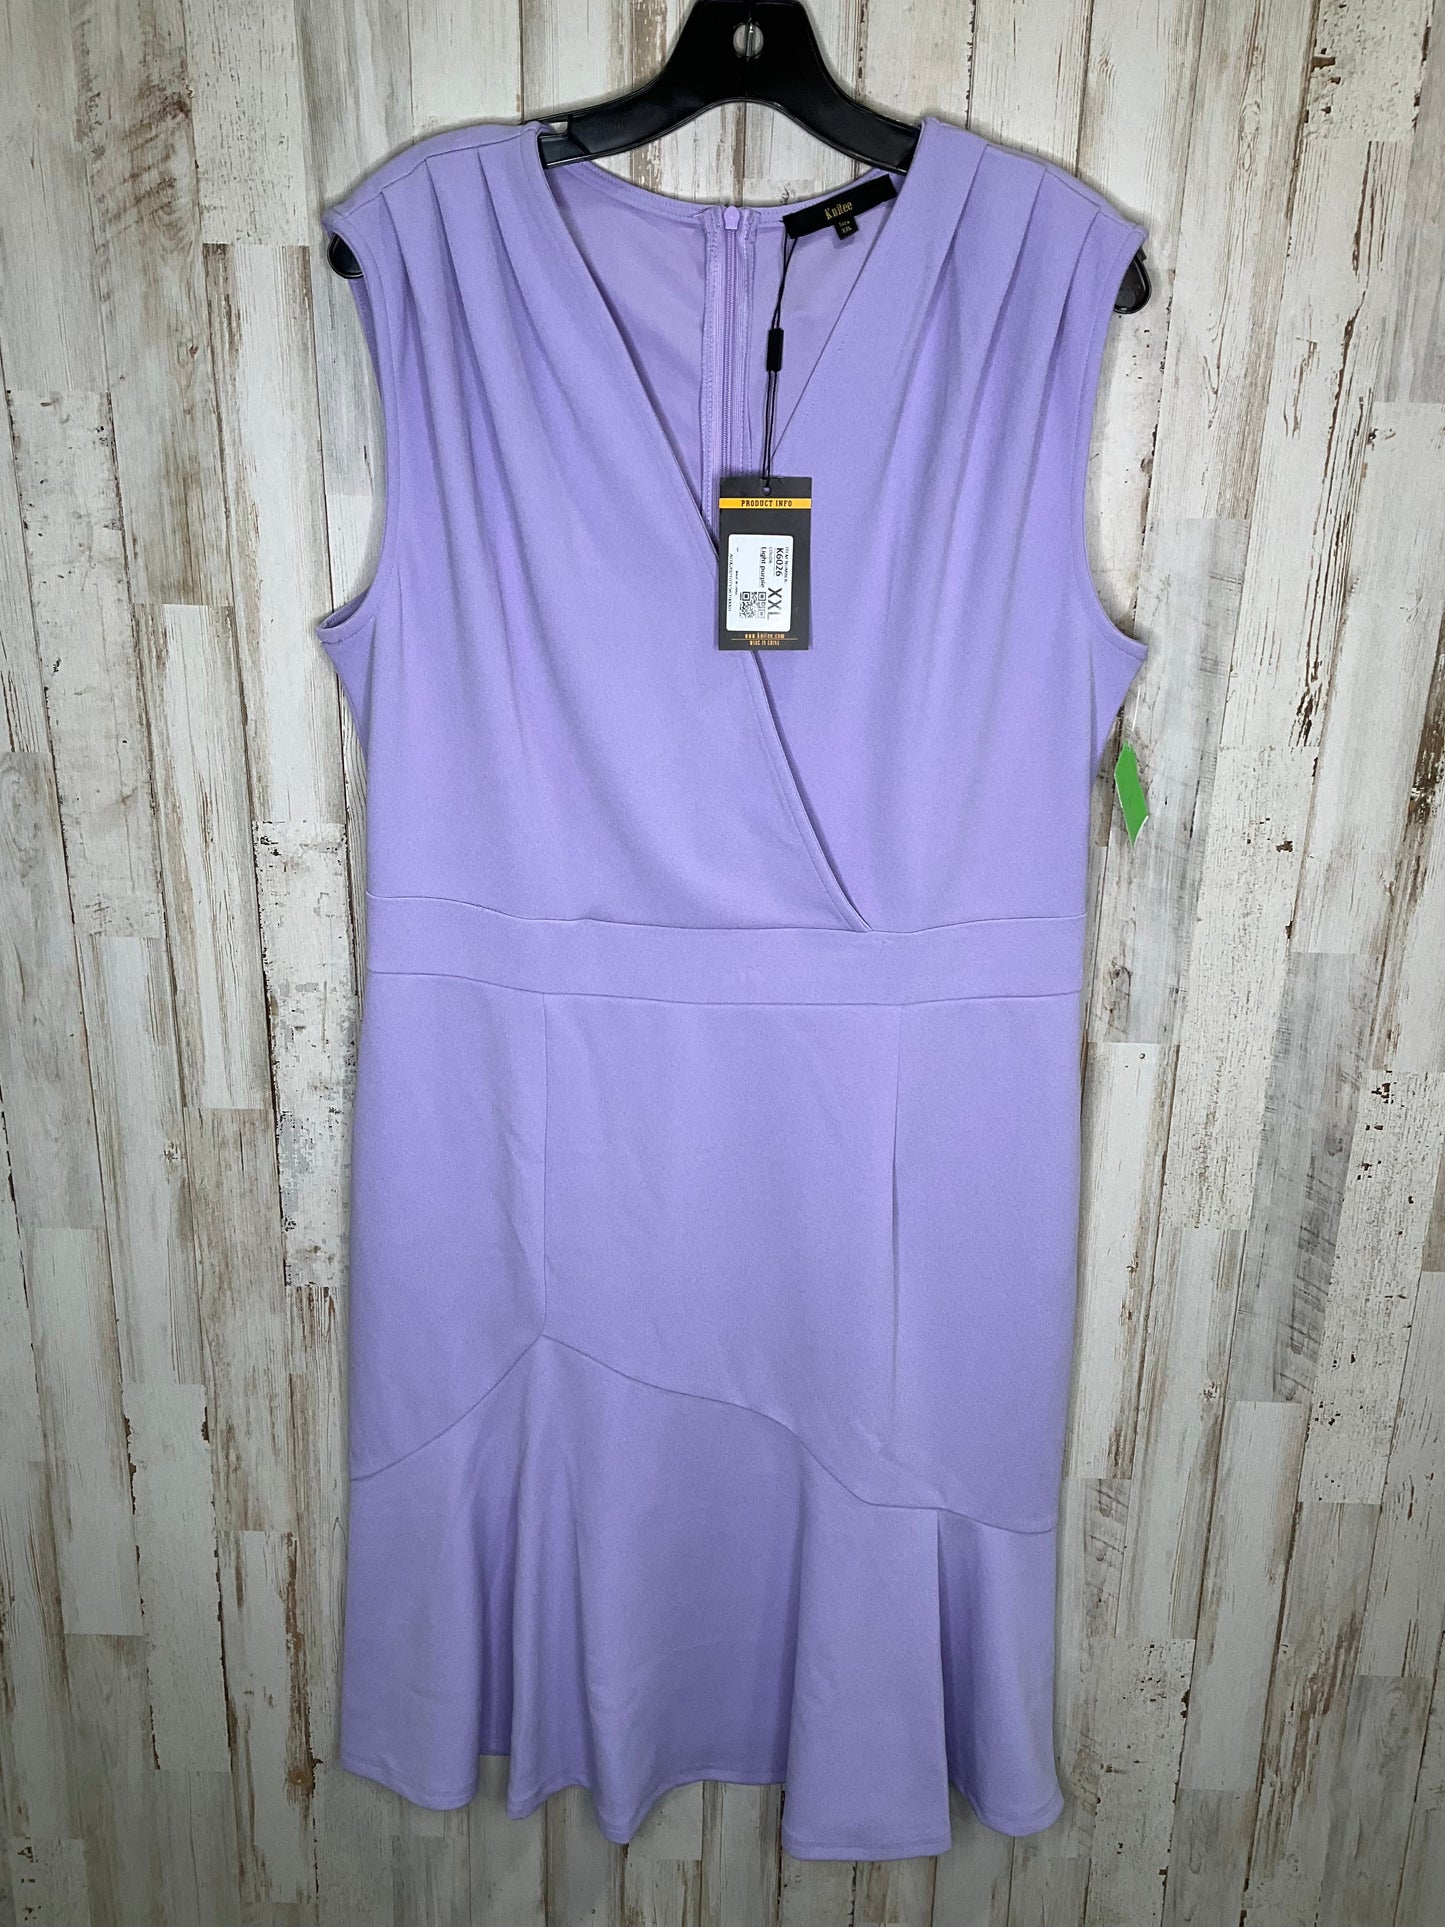 Dress Party Midi By Clothes Mentor  Size: 1x